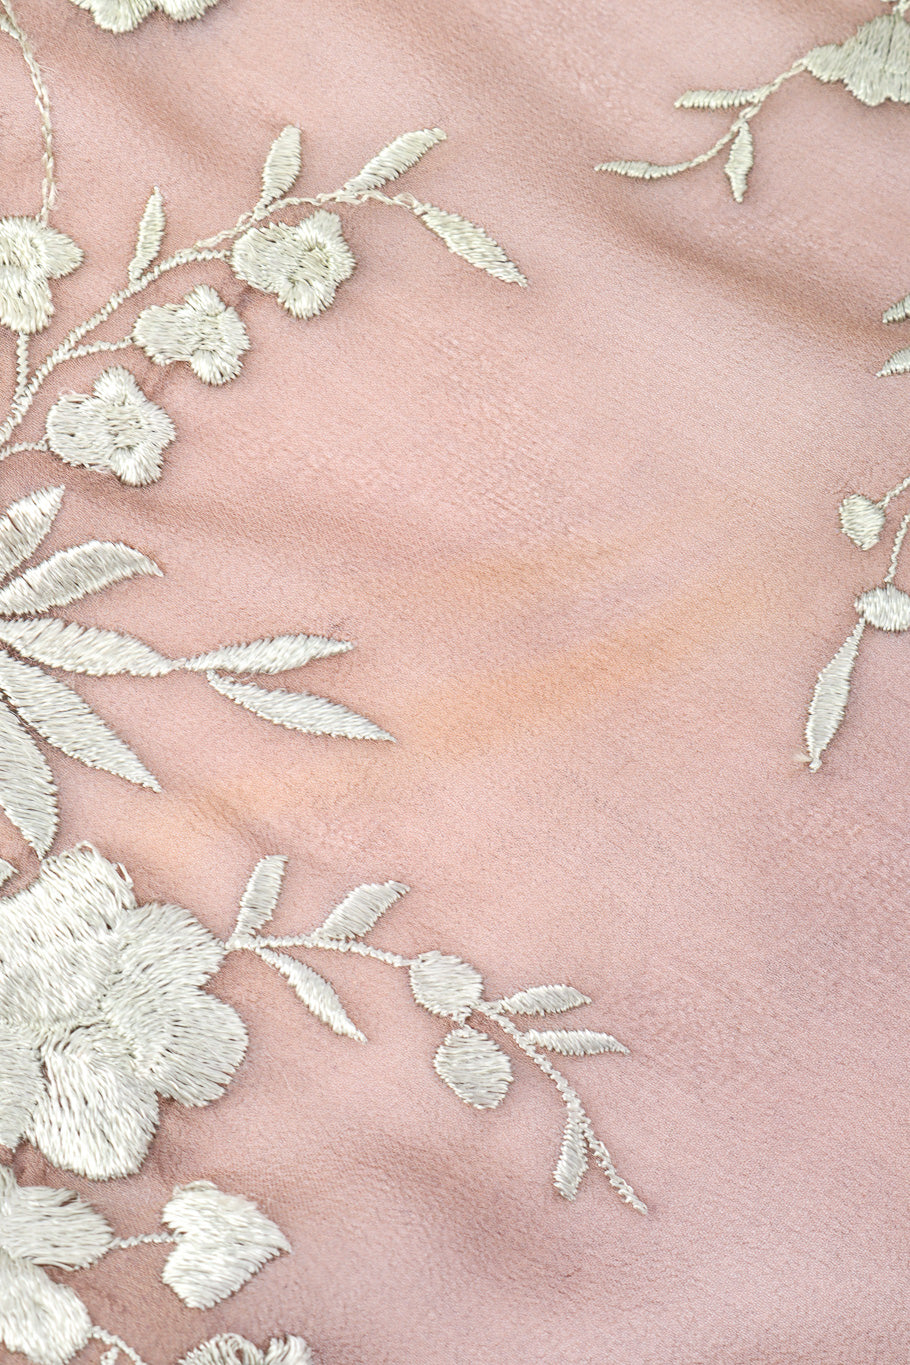 Vintage chiffon embroidered skirt discoloration @recessla